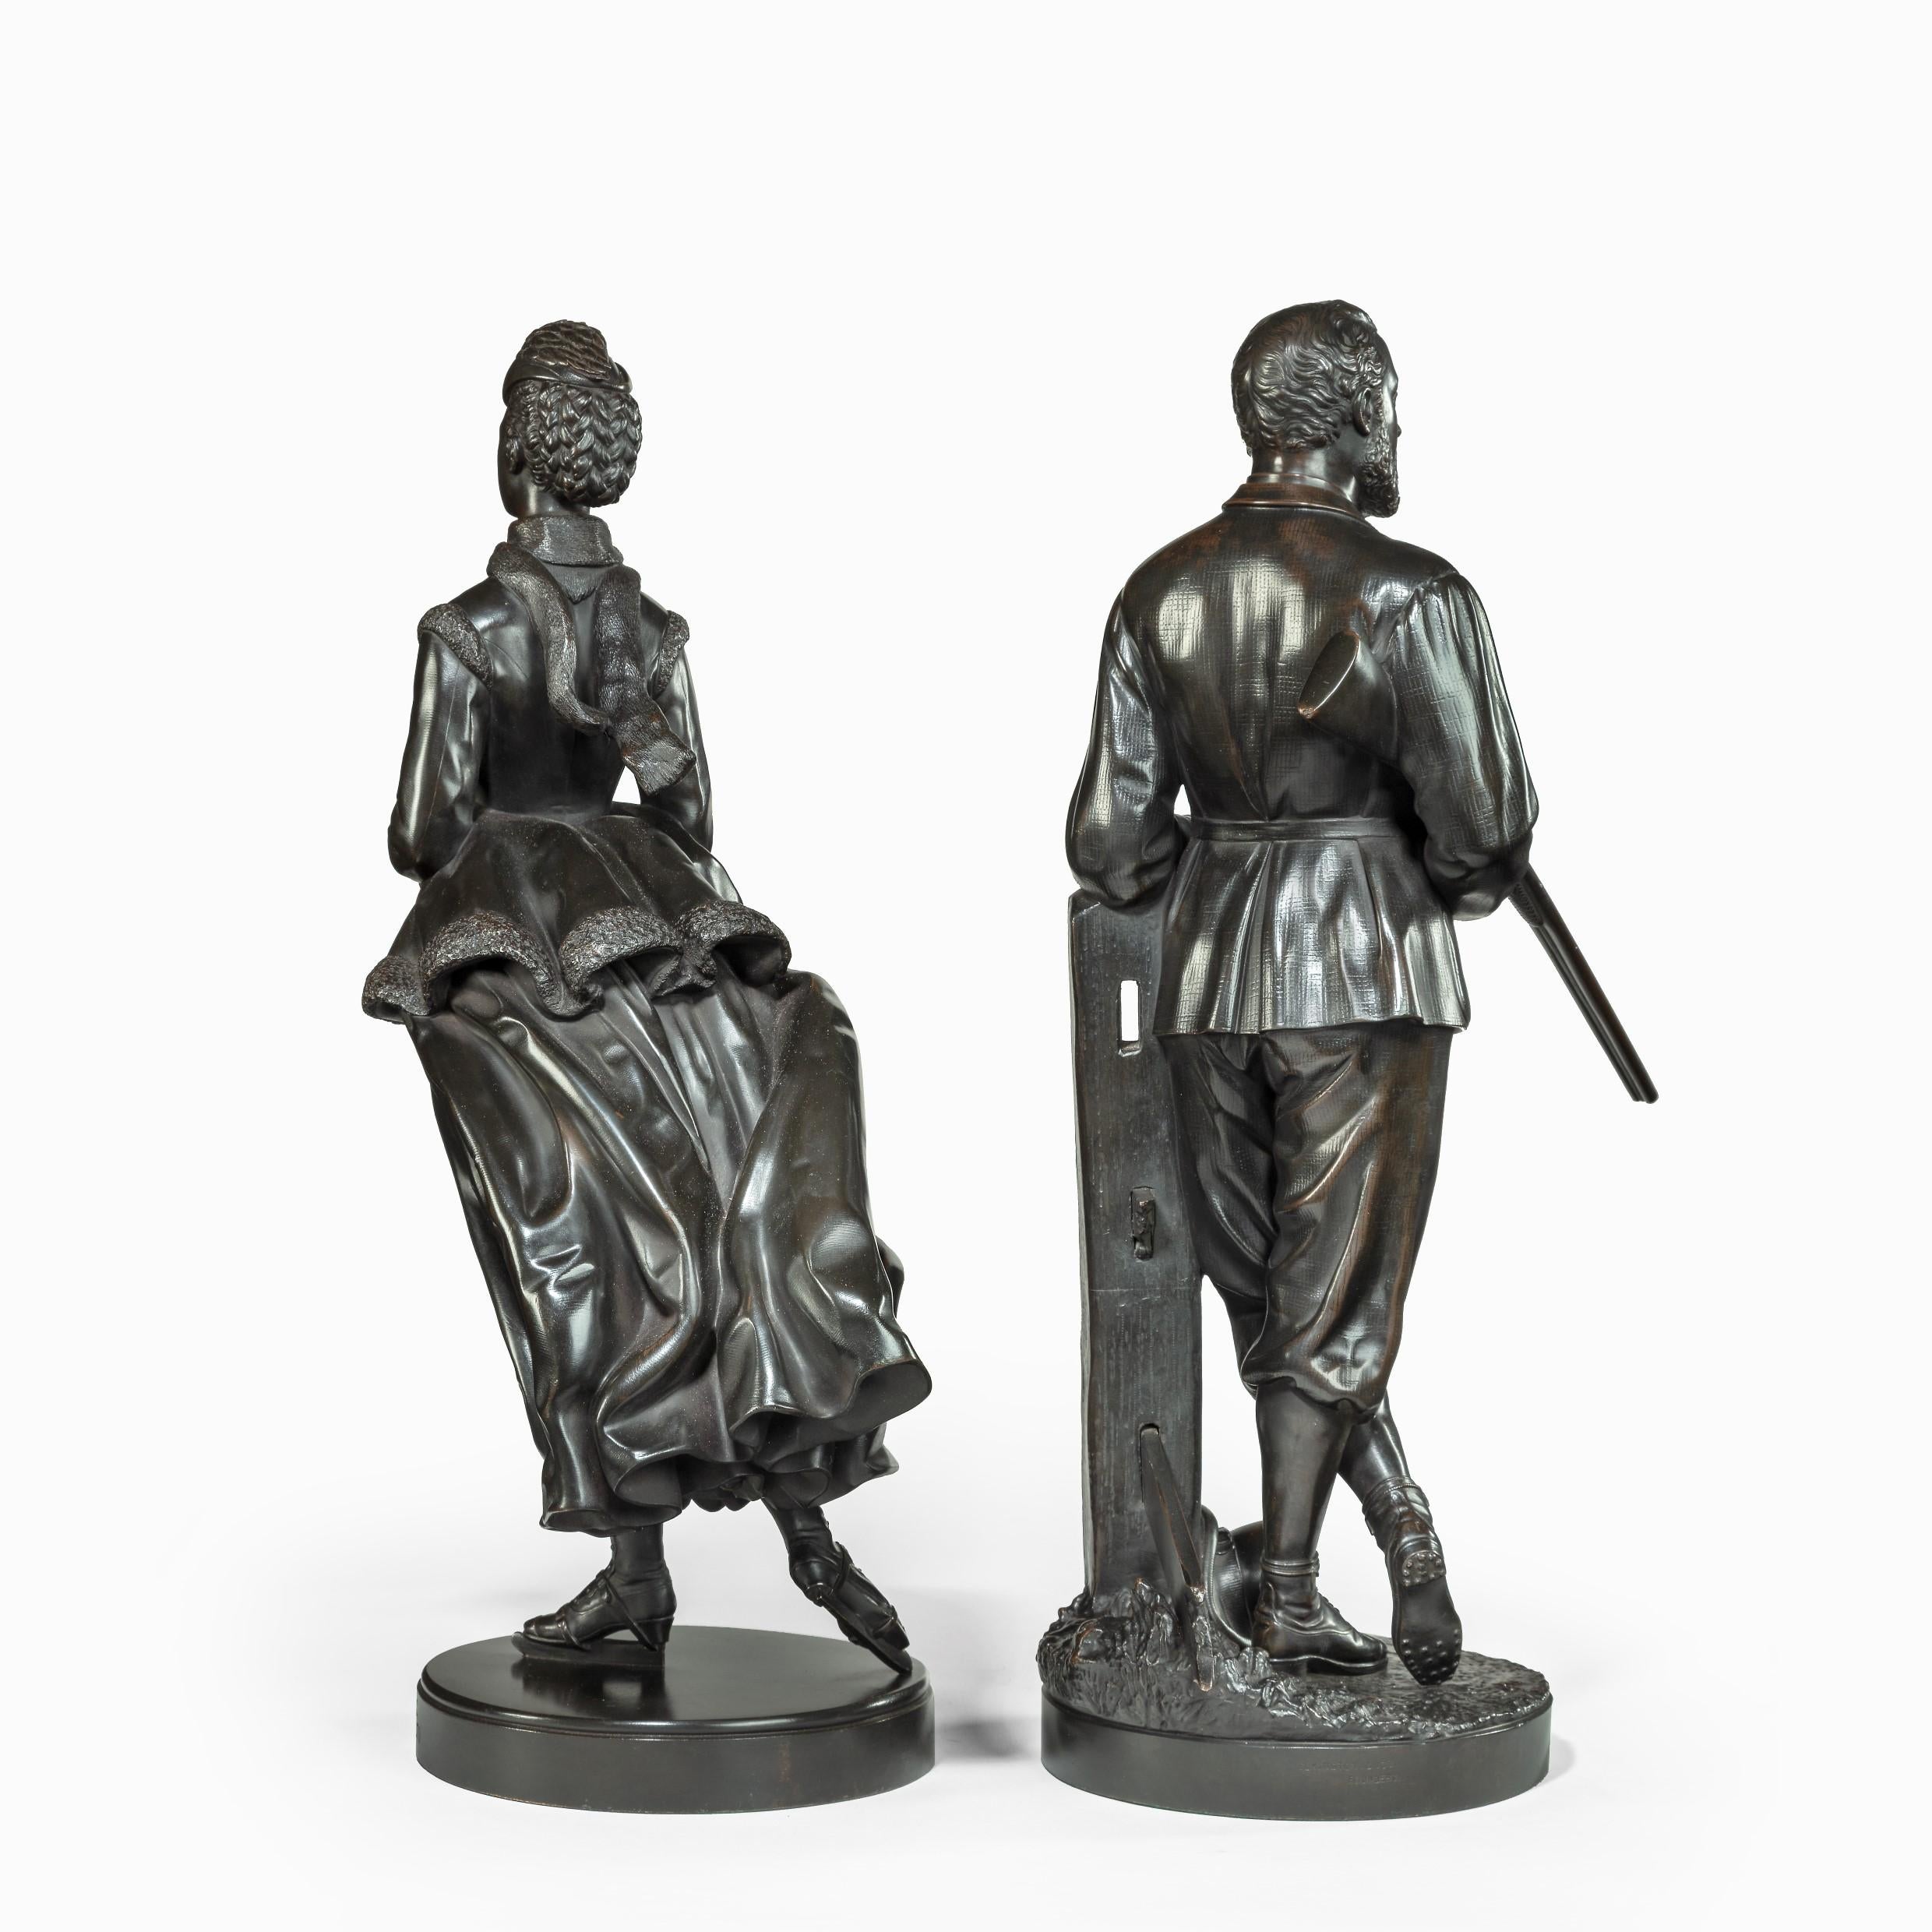 These bronze figures show Edward, Prince of Wales, standing in a nonchalant pose with one leg crossed over the other, a cigar in his left hand, his hat at his feet and a shotgun slung over his right arm. The elegant Princess of Wales is depicted